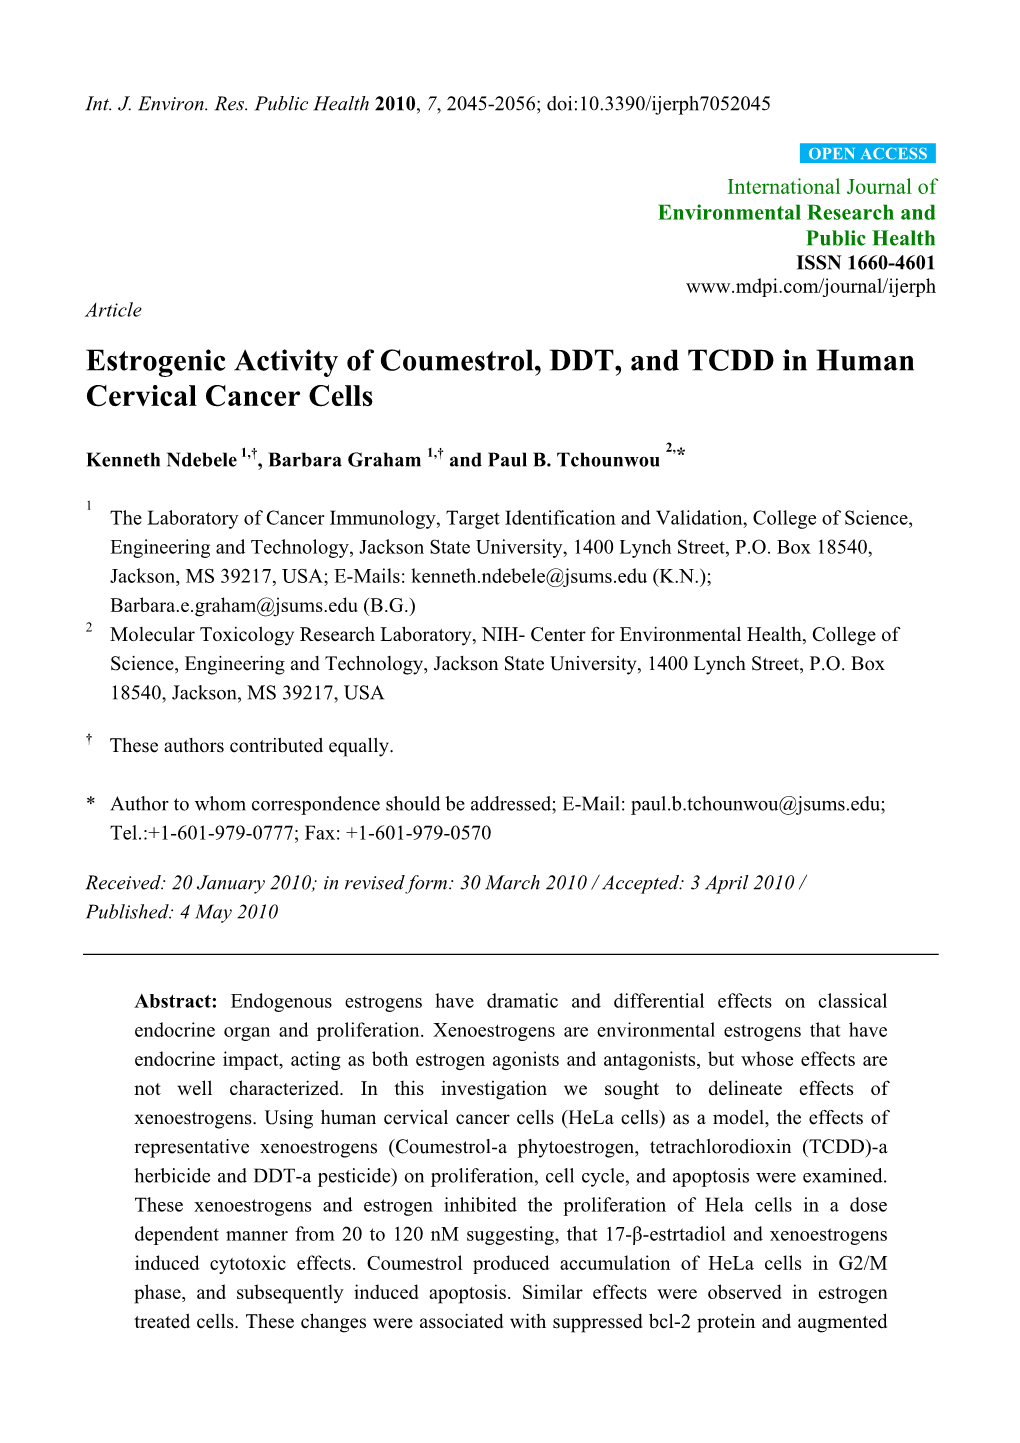 Estrogenic Activity of Coumestrol, DDT, and TCDD in Human Cervical Cancer Cells